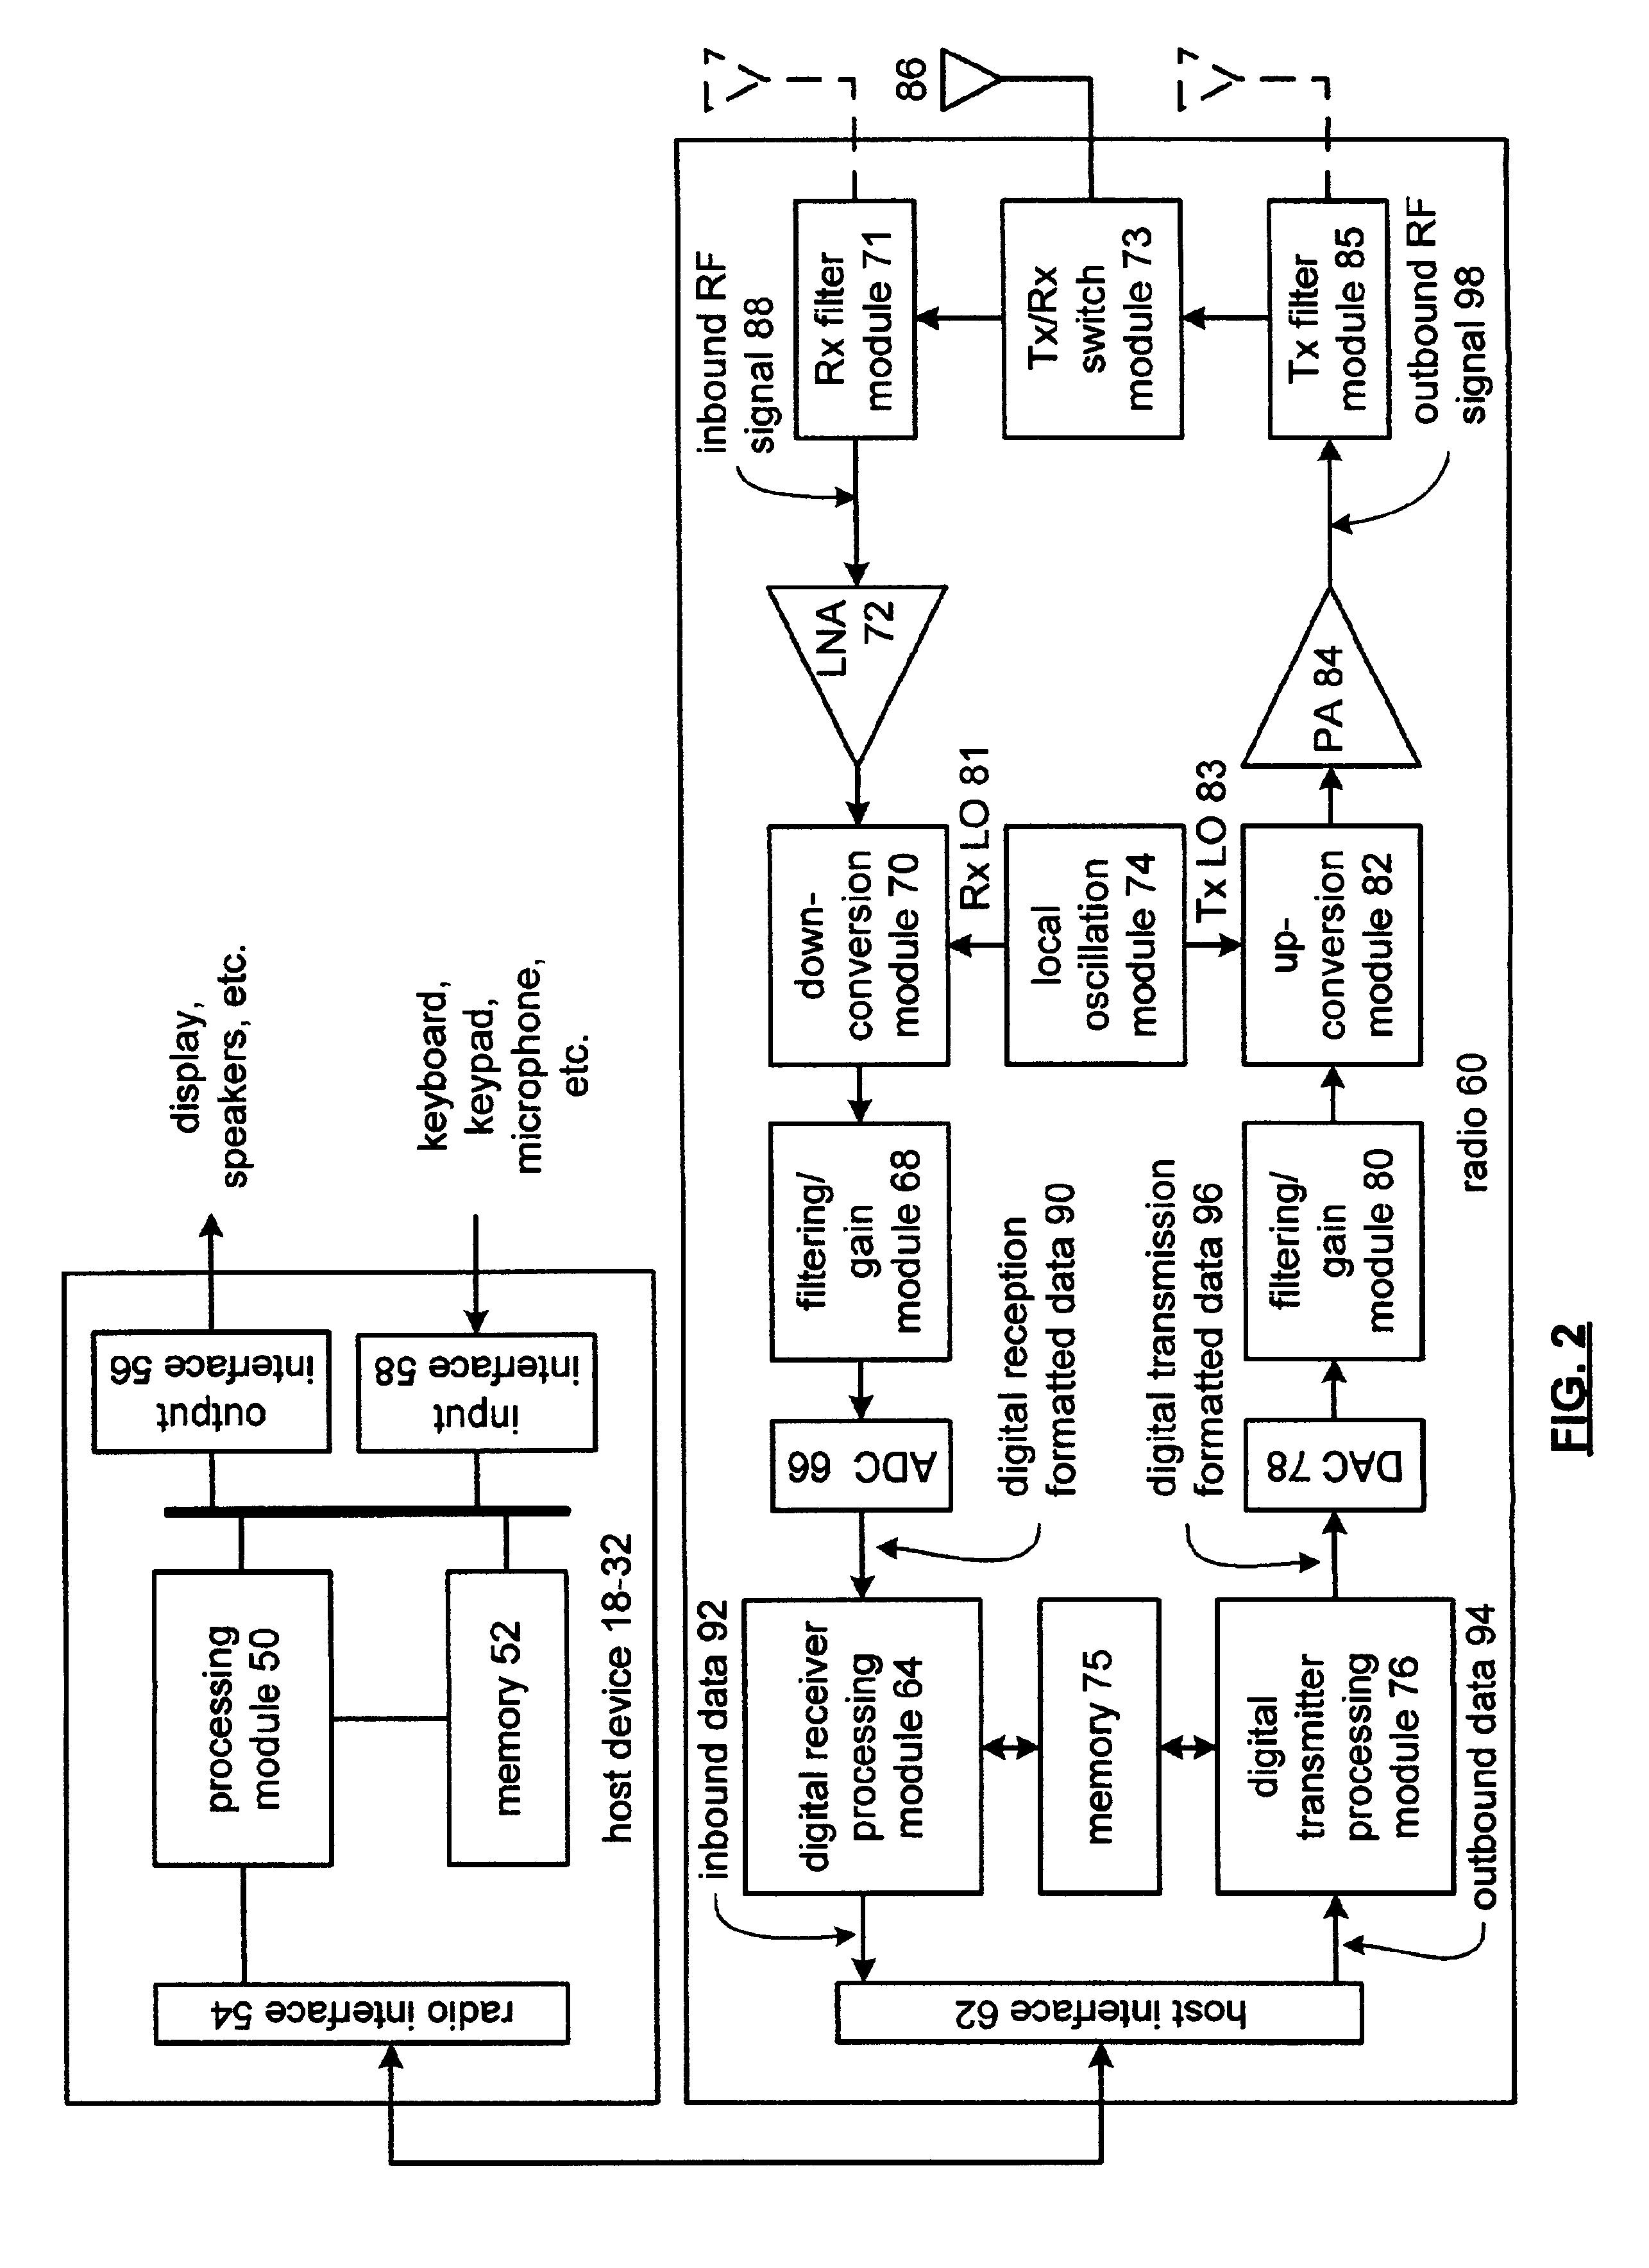 Unconditionally stable on-chip filter and applications thereof